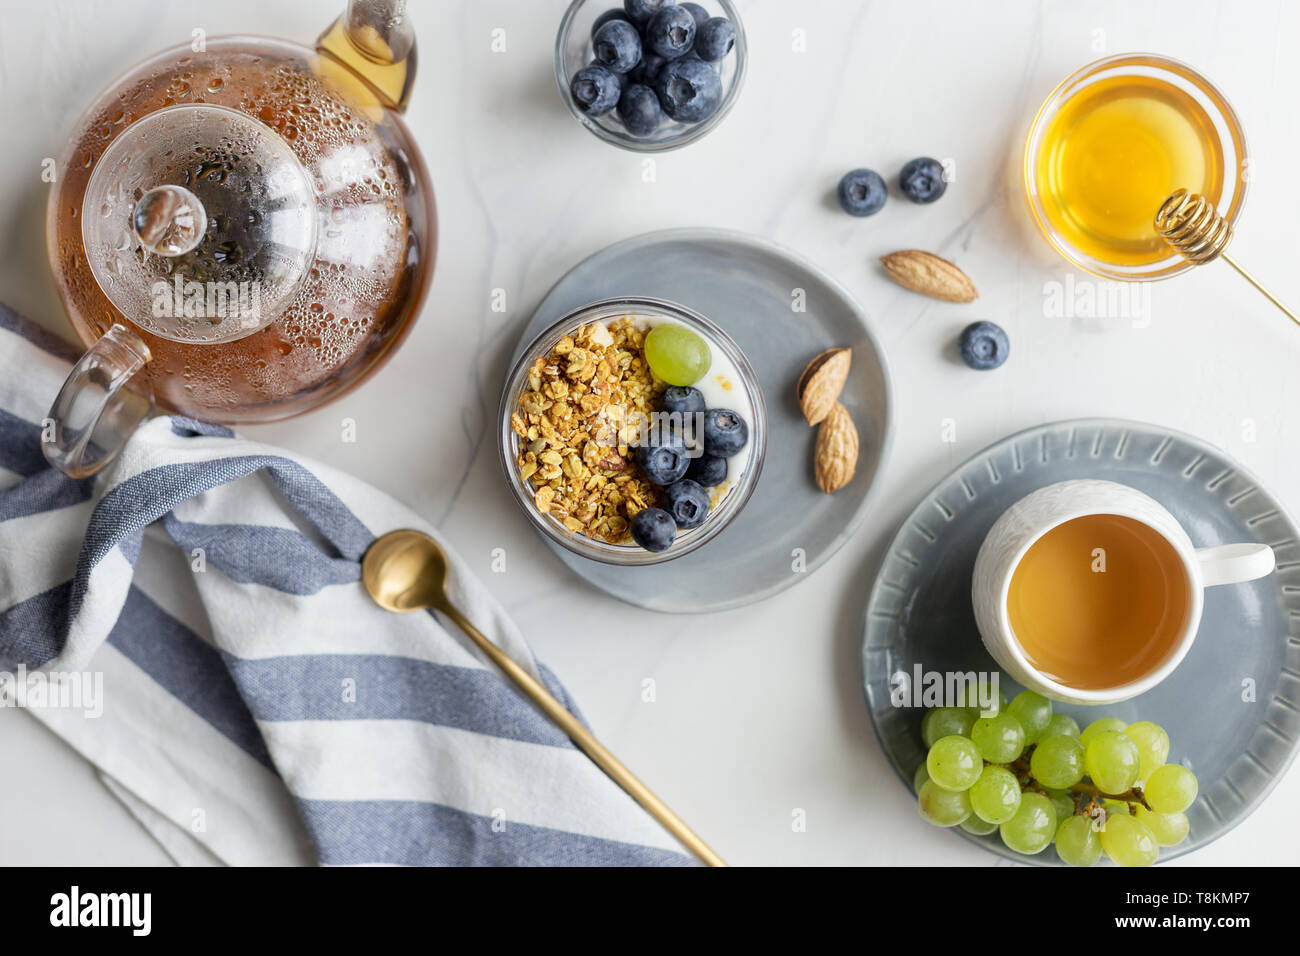 Summer tasty breakfast with granola, blueberry and grape with milk, honey and teacup on white marble background with napkin. Concept of healthy breakf Stock Photo